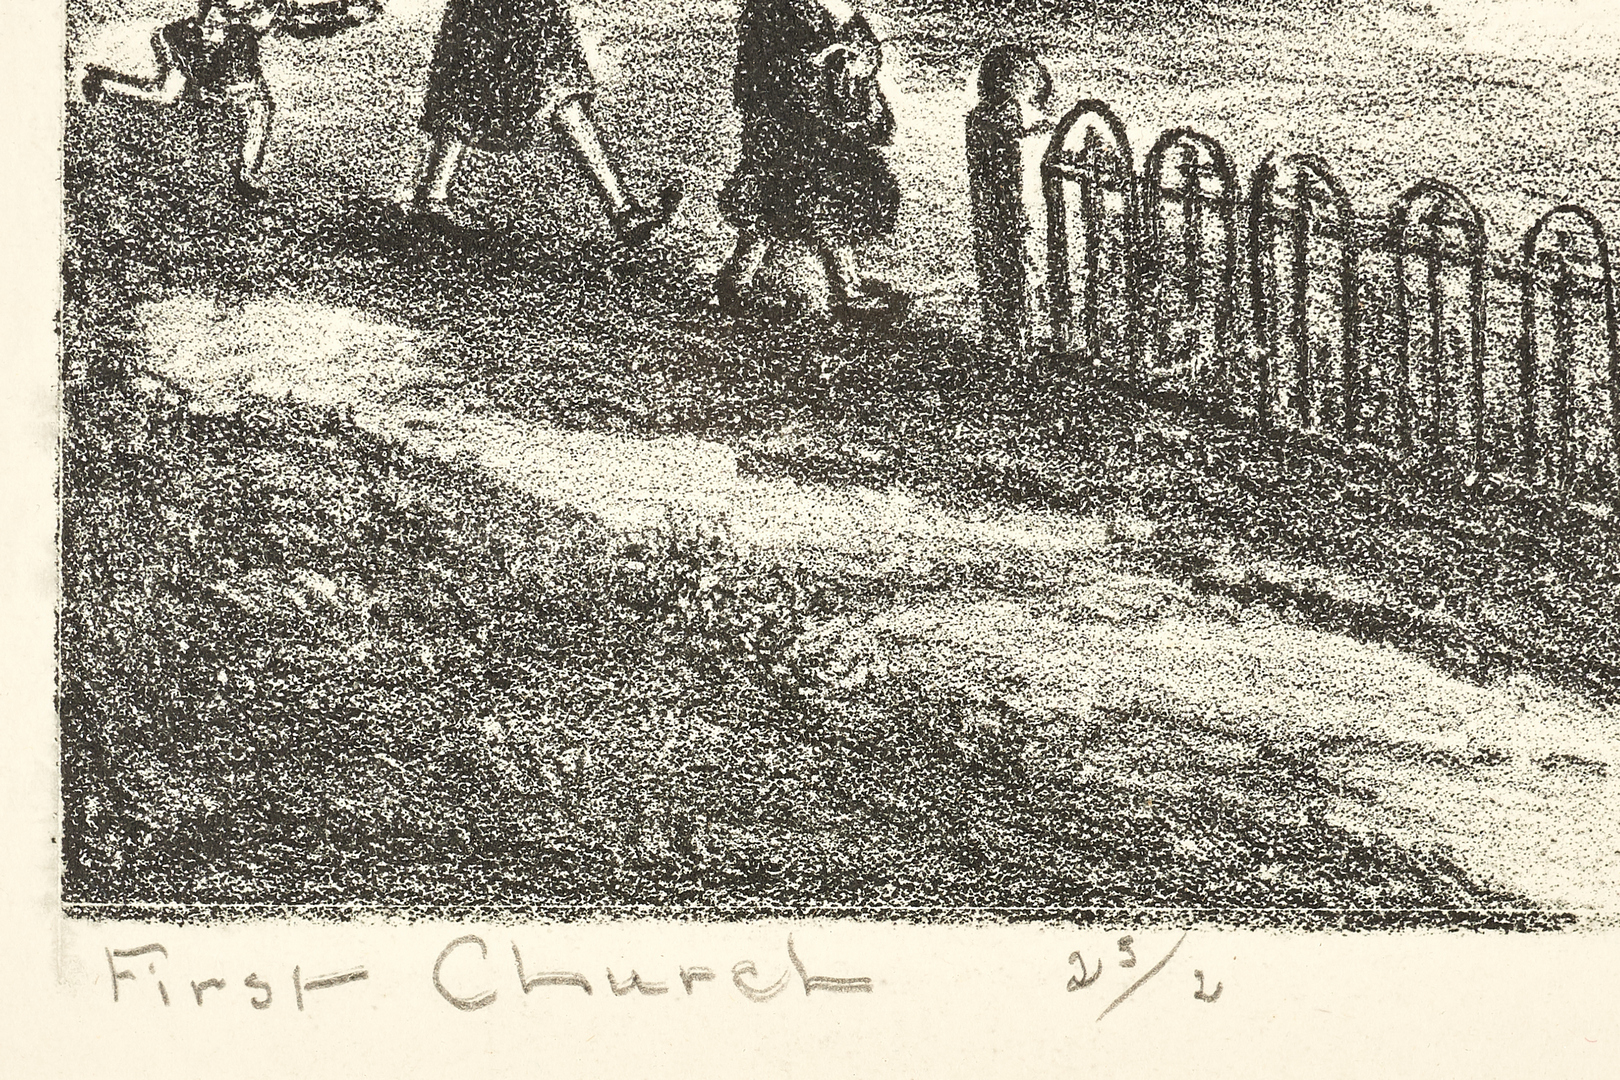 Lot 520: Mary Lightfoot Etching, First Church